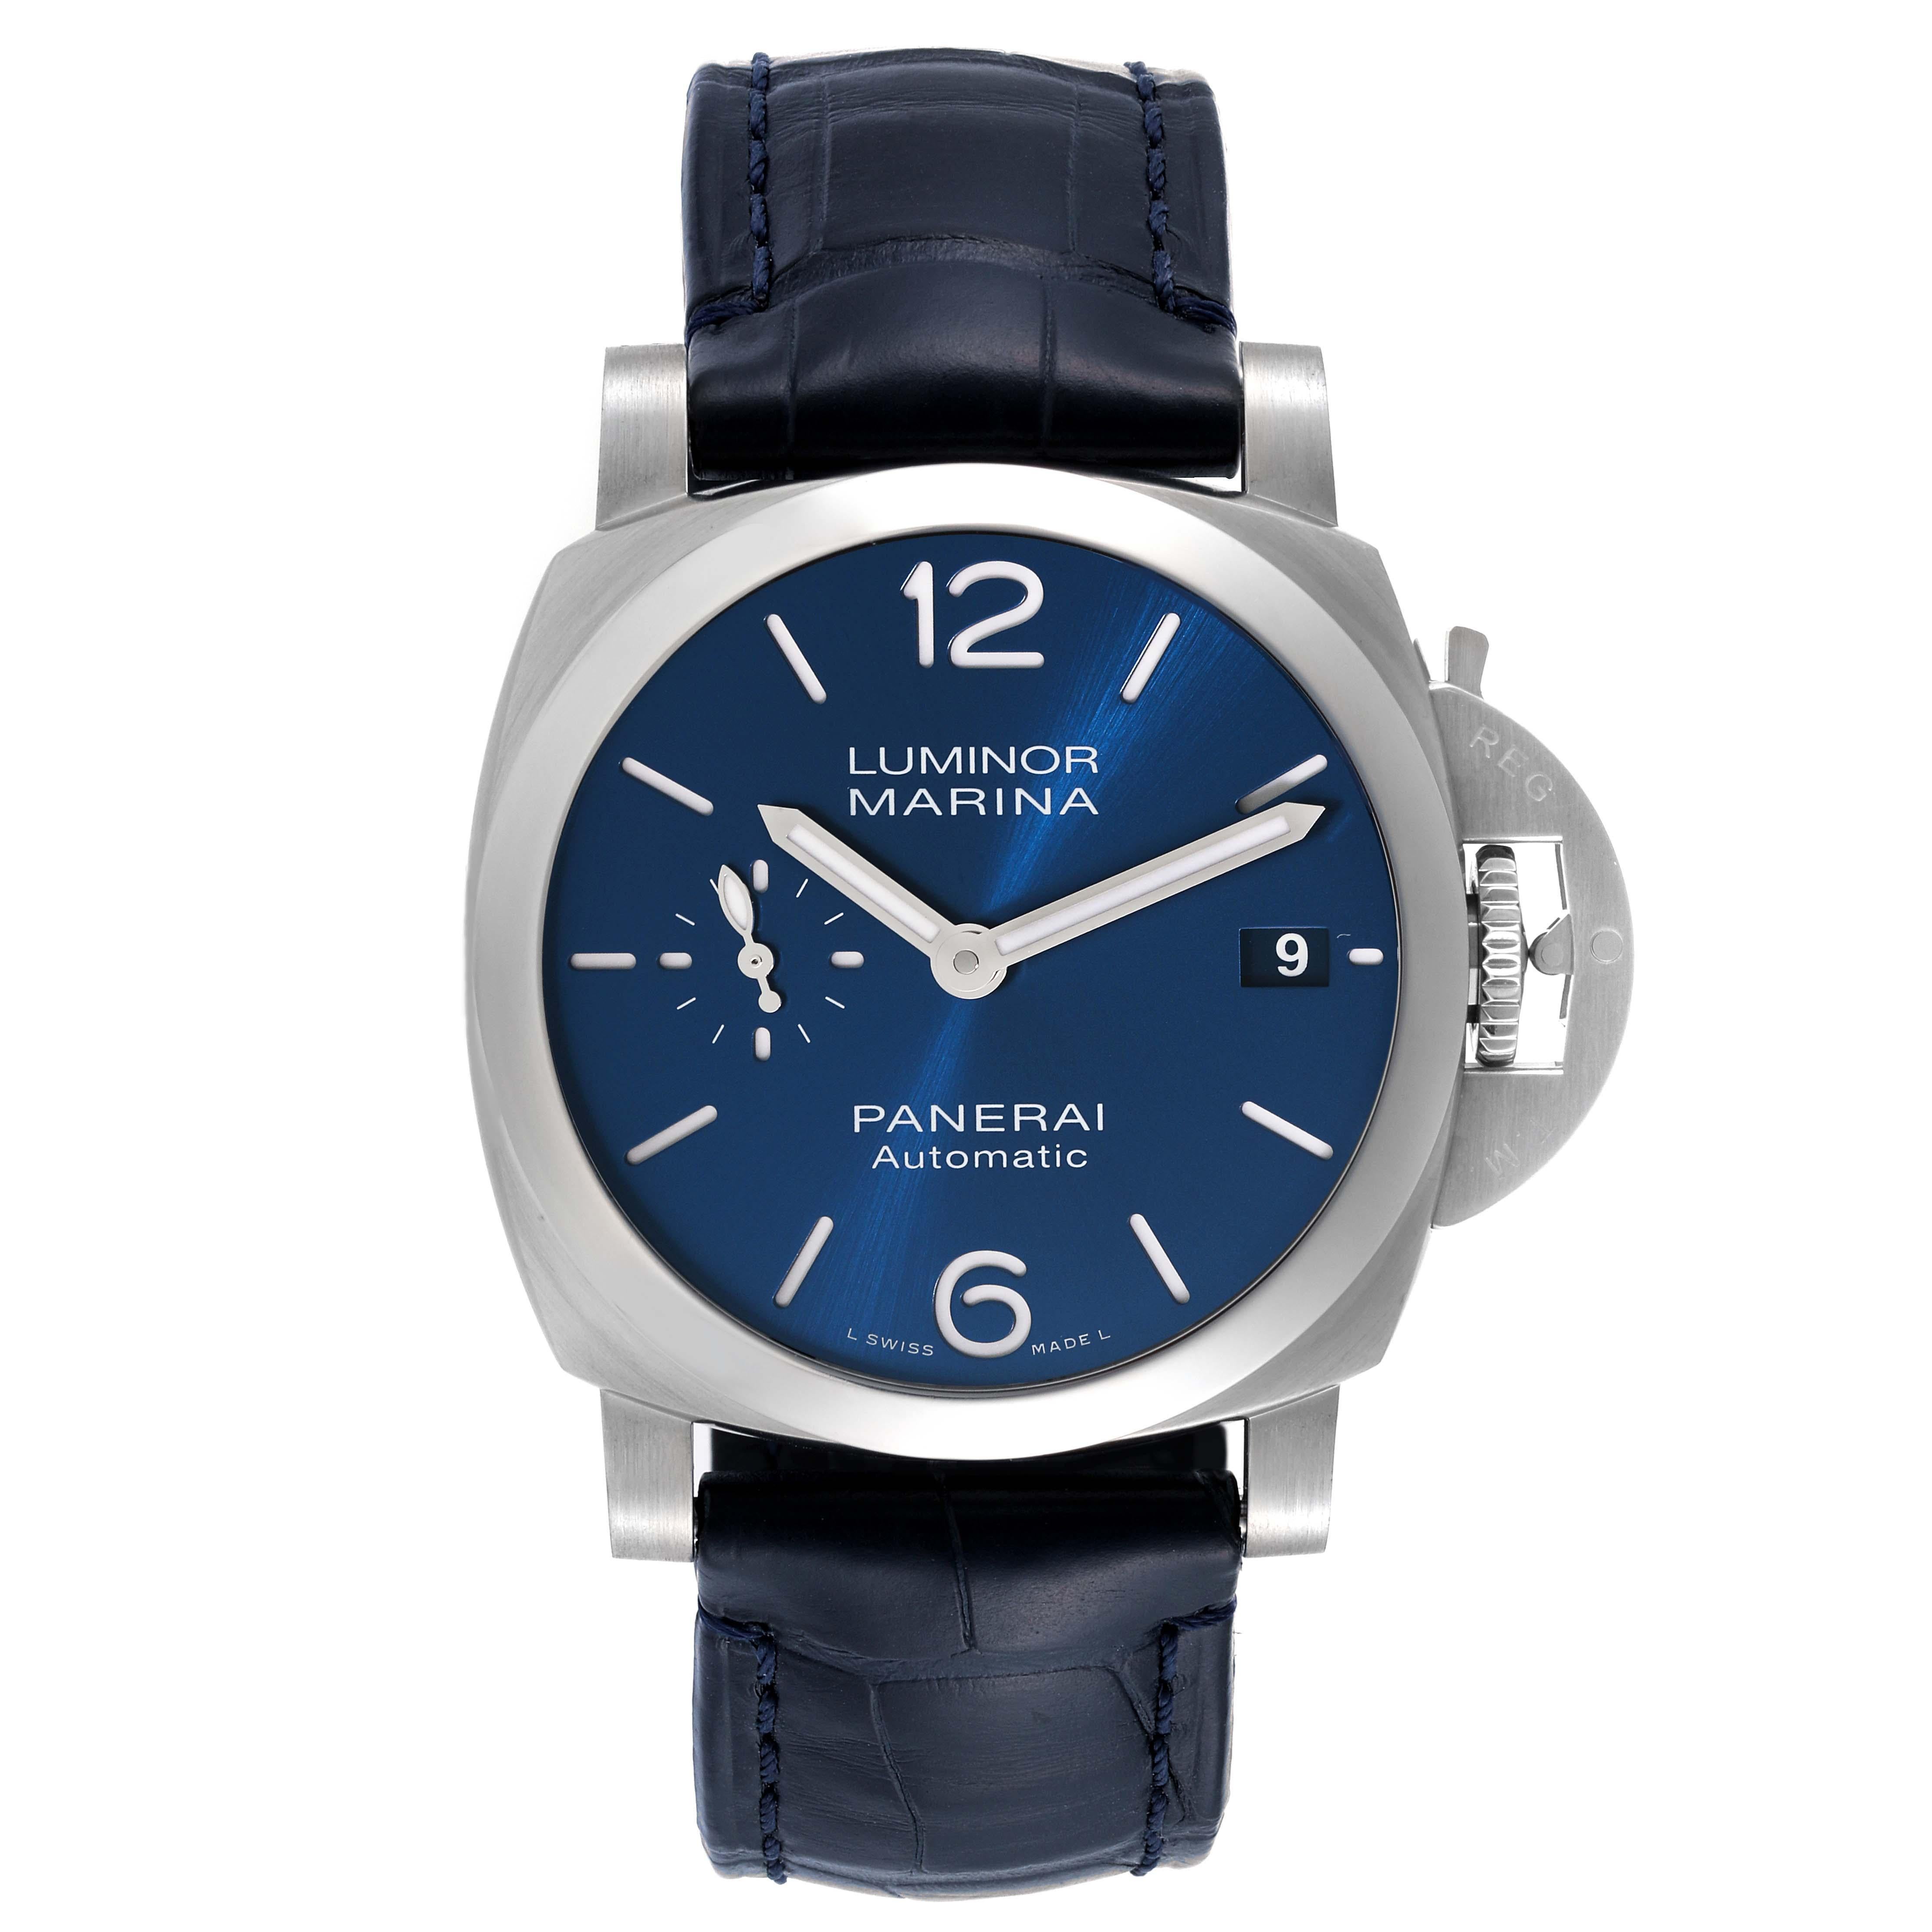 Panerai Luminor Marina Quaranta Blue Dial Steel Mens Watch PAM01370 Box Card. Automatic self-winding movement. Brushed stainless steel cushion case 40mm in diameter. Panerai patented crown protector. Polished stainless steel smooth bezel. Scratch